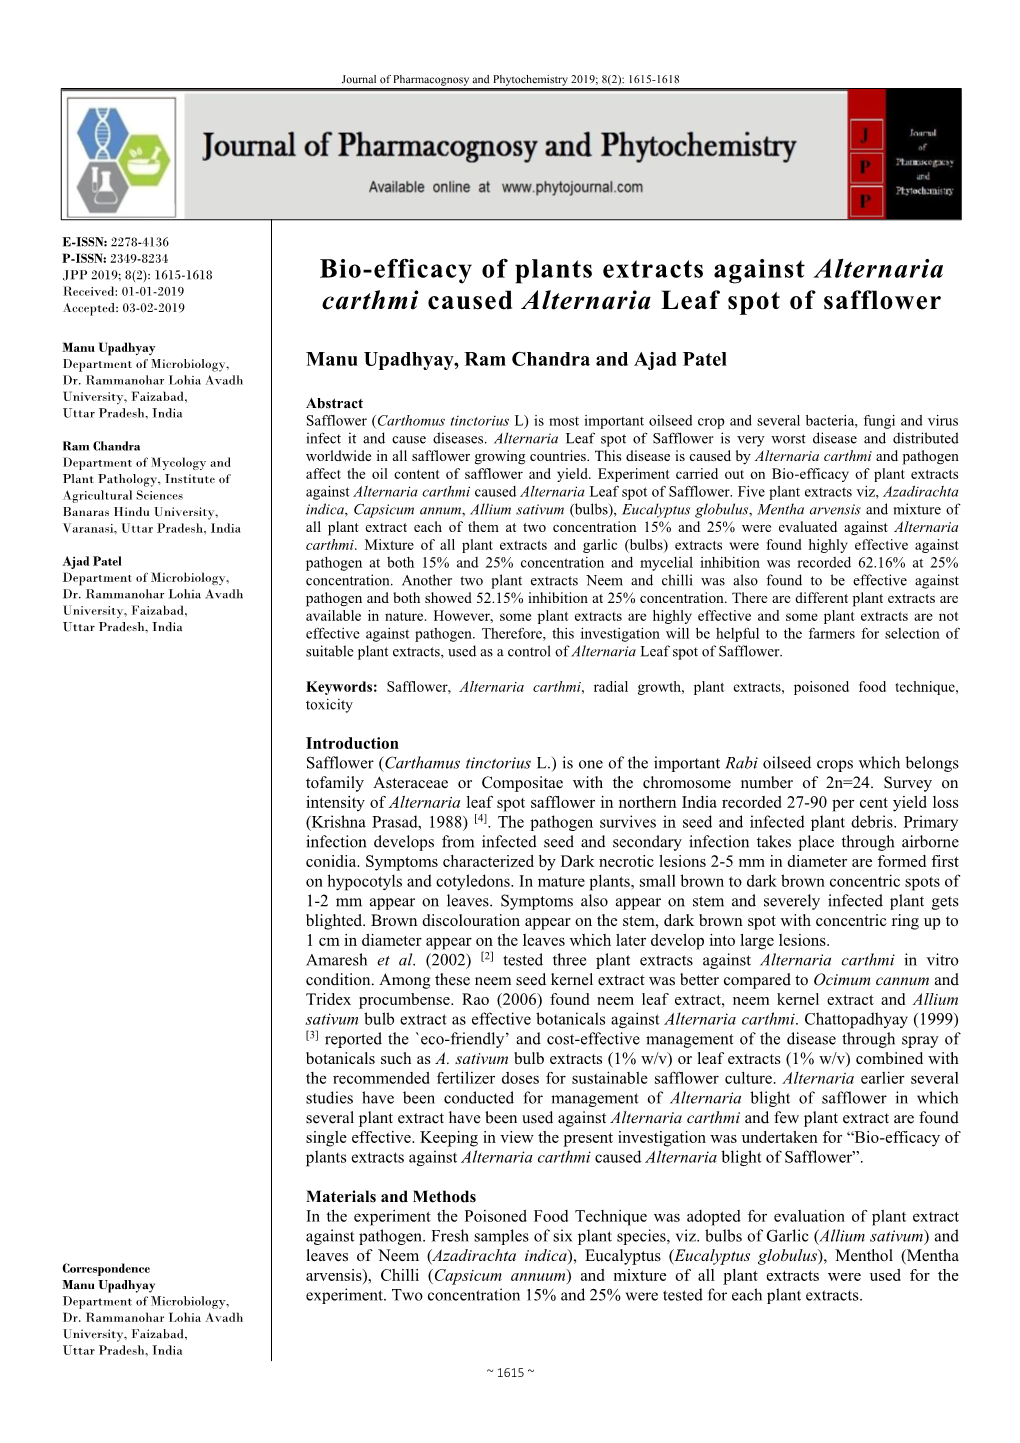 Bio-Efficacy of Plants Extracts Against Alternaria Carthmi Caused Alternaria Blight of Safflower”